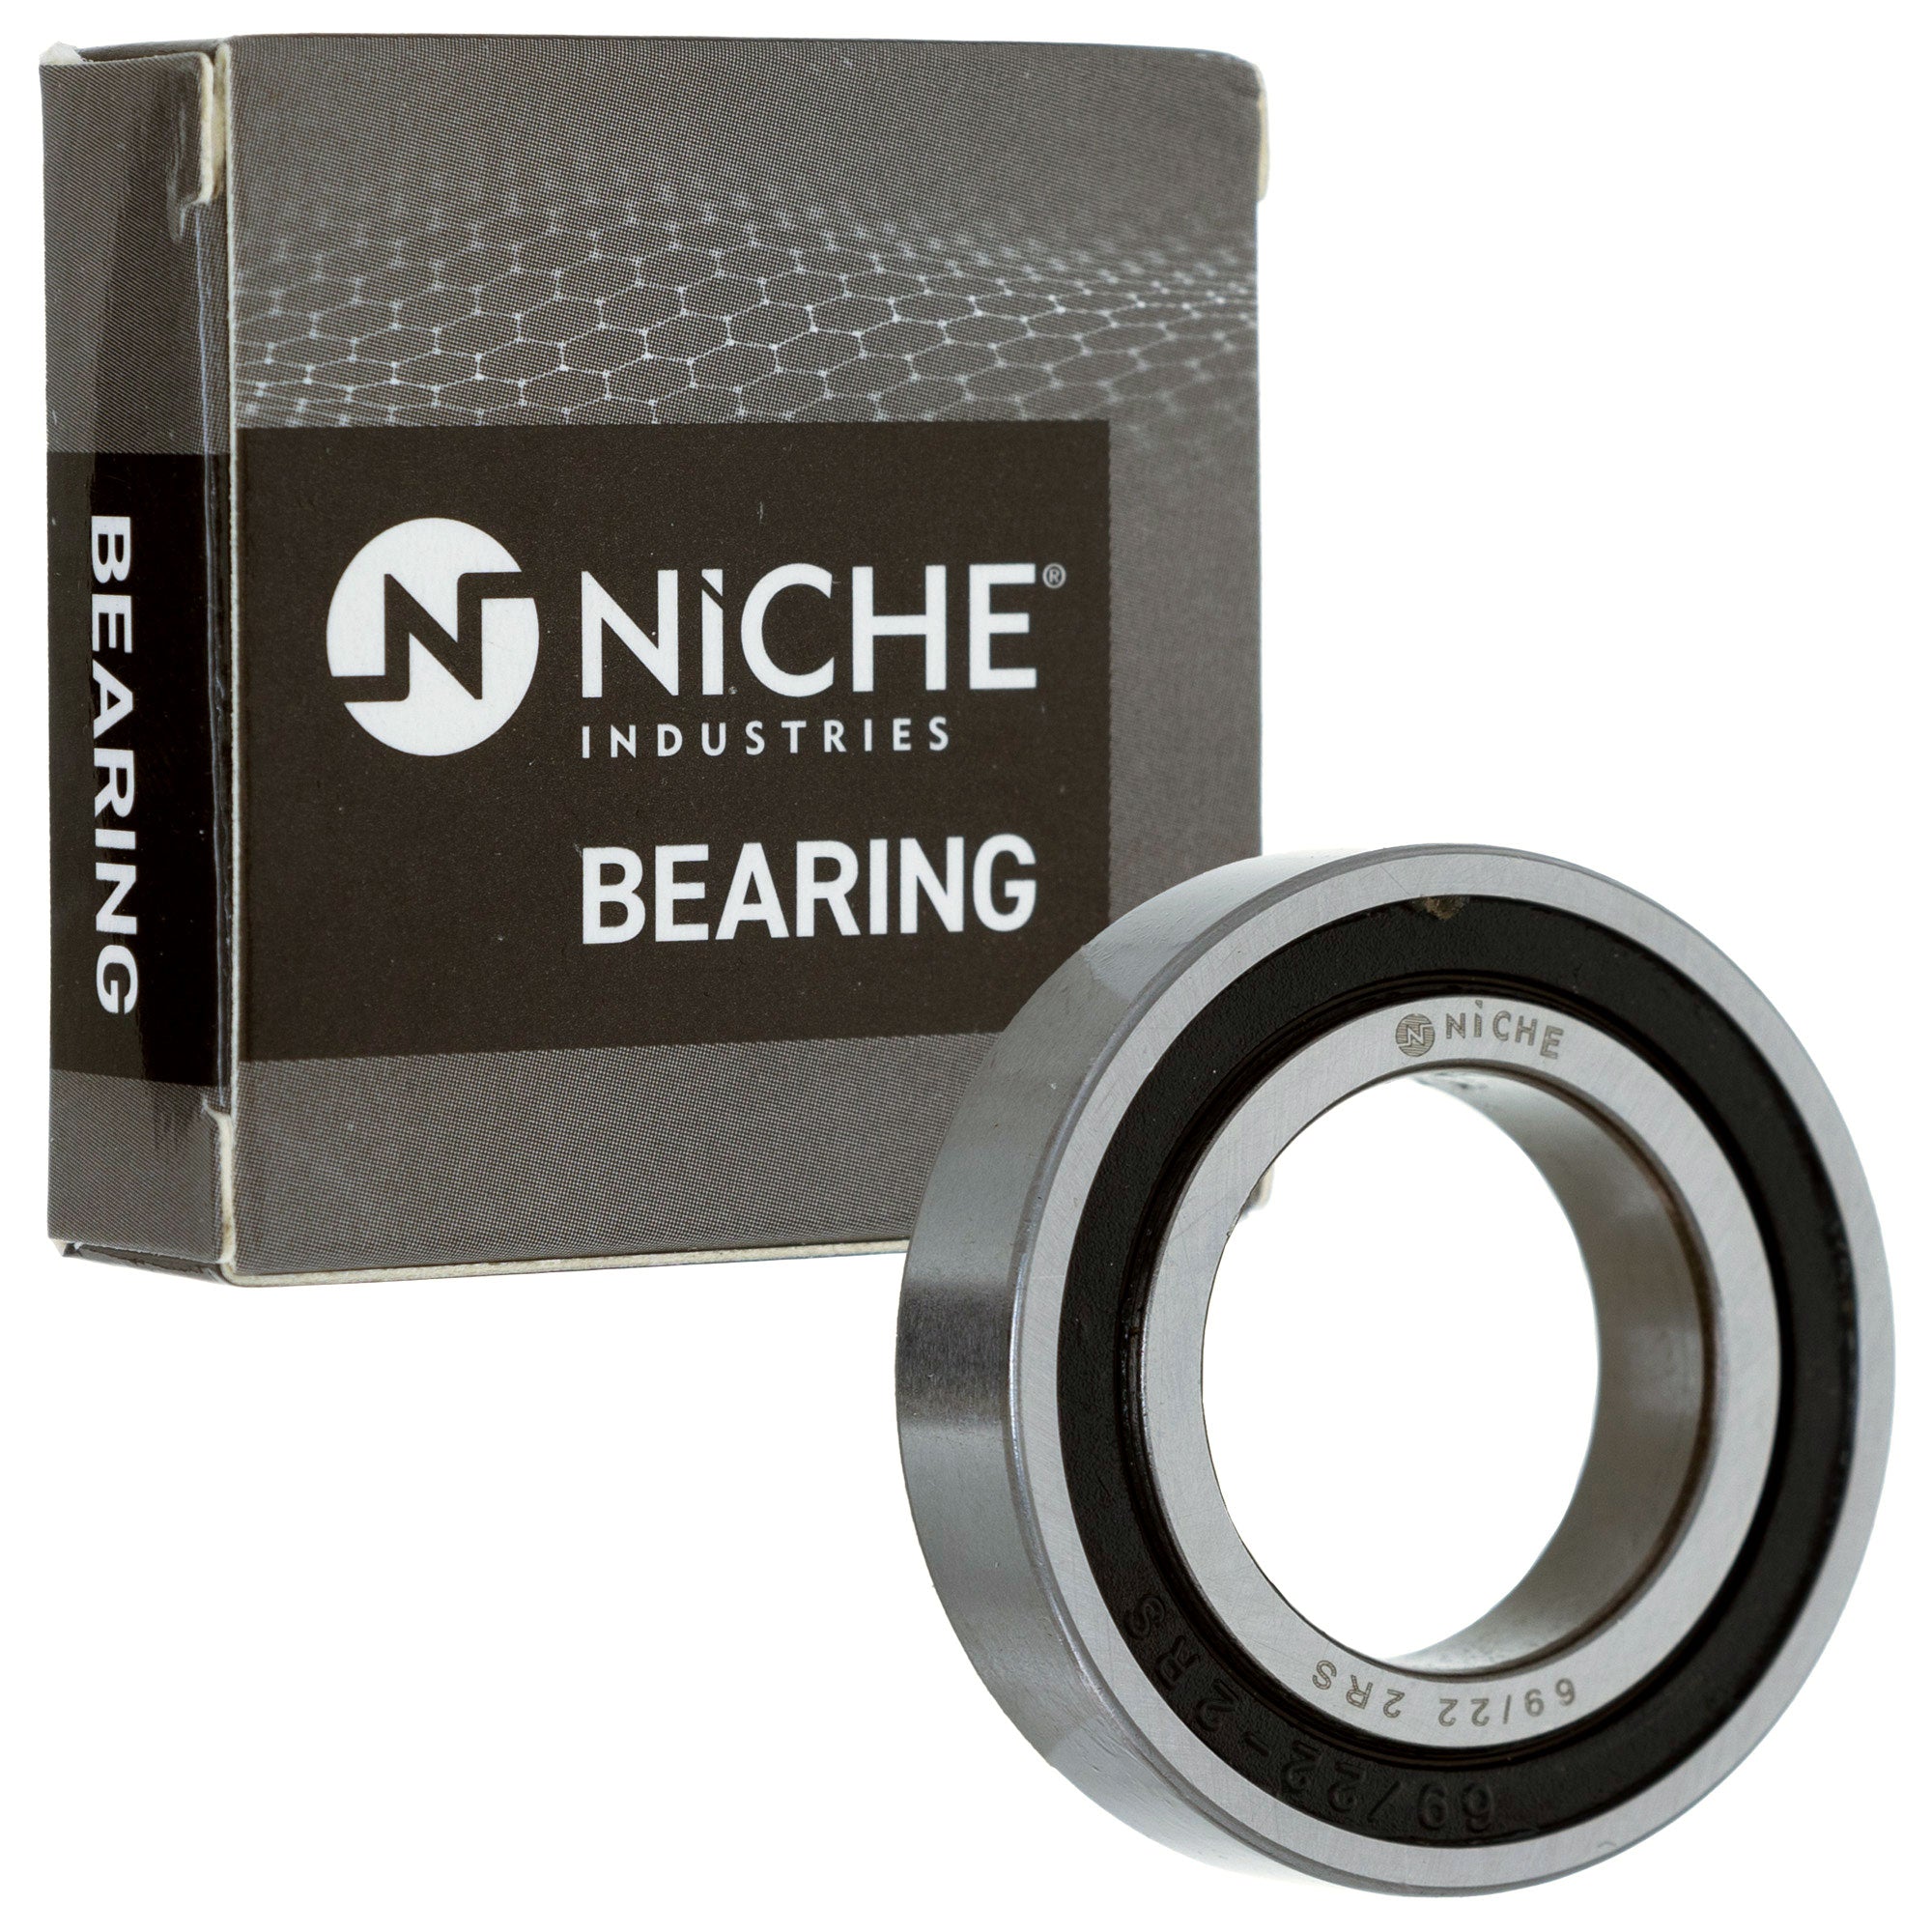 NICHE 519-CBB2201R Bearing 10-Pack for zOTHER YZ450FX YZ450F YZ250FX